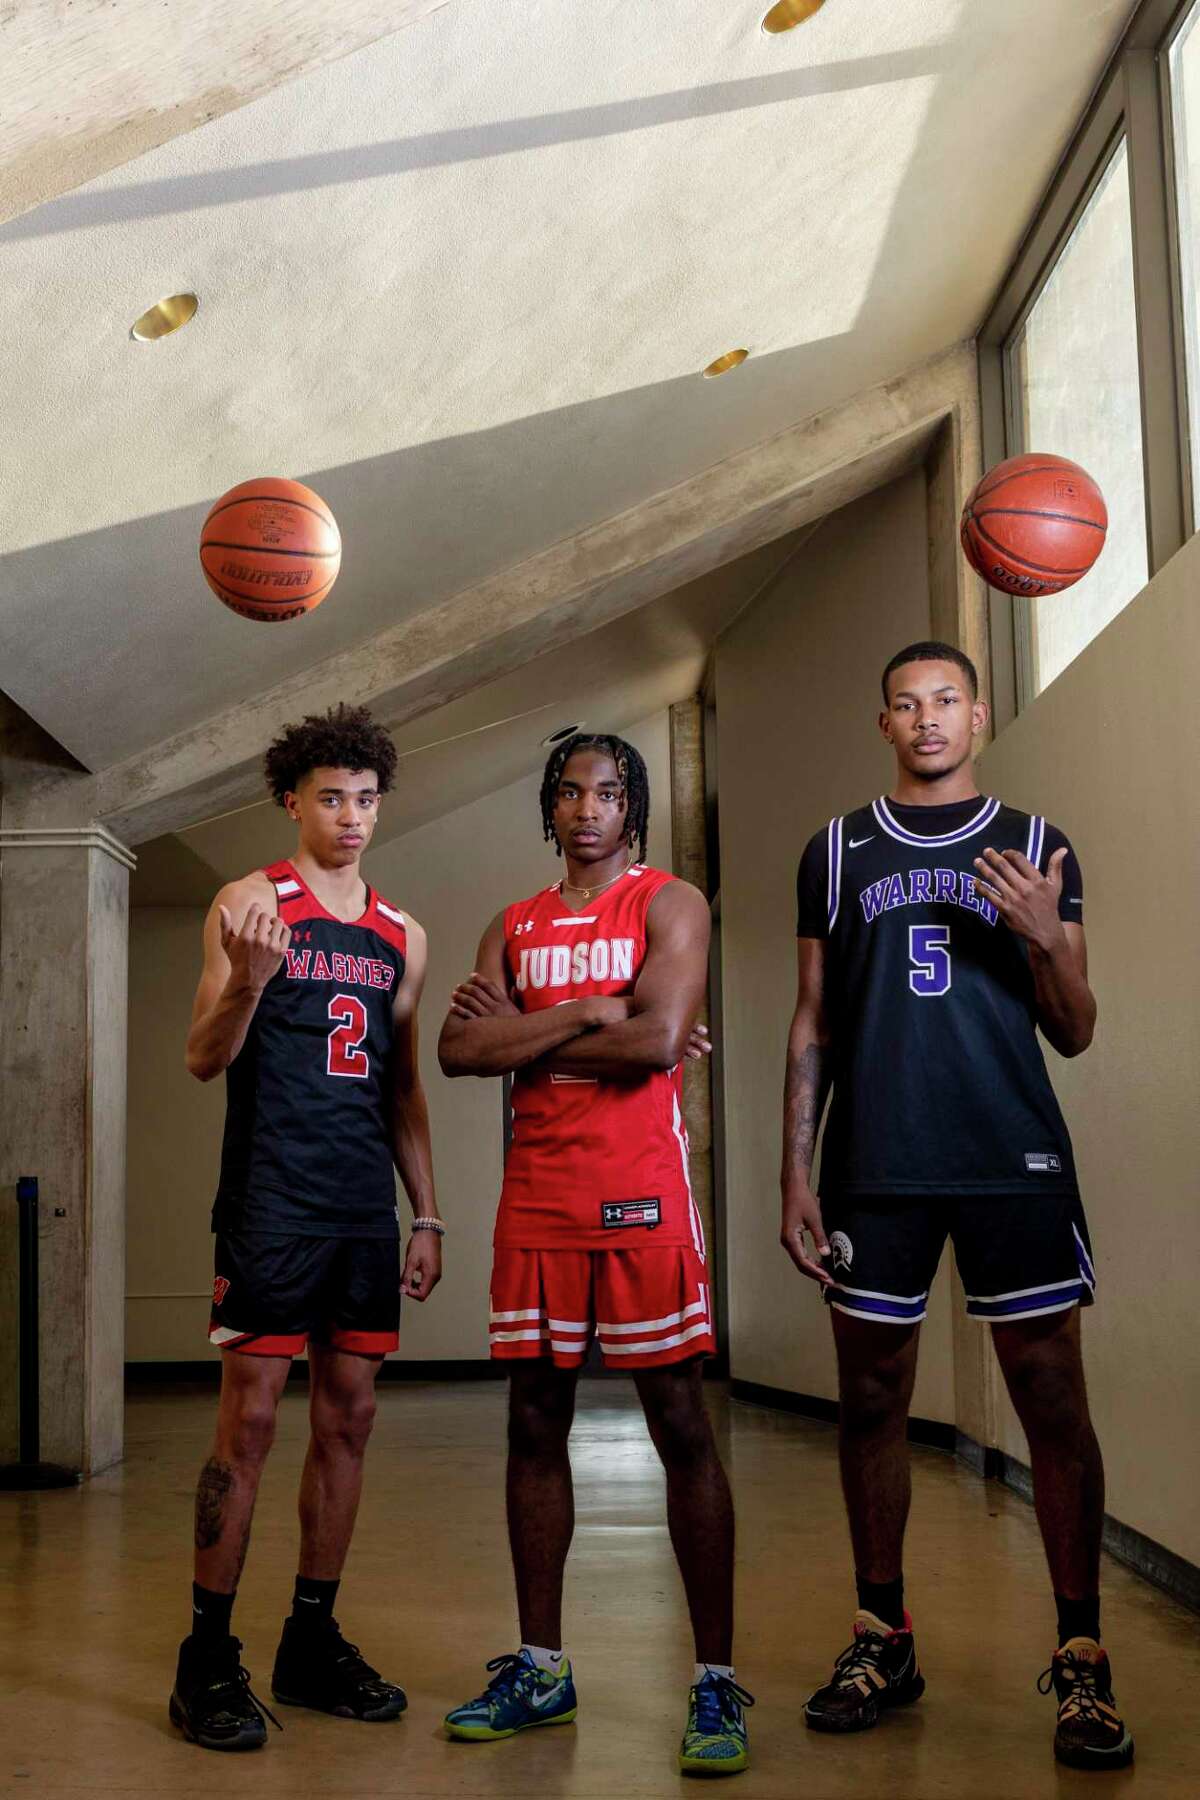 Player of the Year finalists (from left) Wagner’s Austin Nunez, Warren's Jaylen Crocker-Johnson and Judson’s Anariss Brandon are pictured at Paul Taylor Field House in San Antonio, Texas, on April 12, 2022.